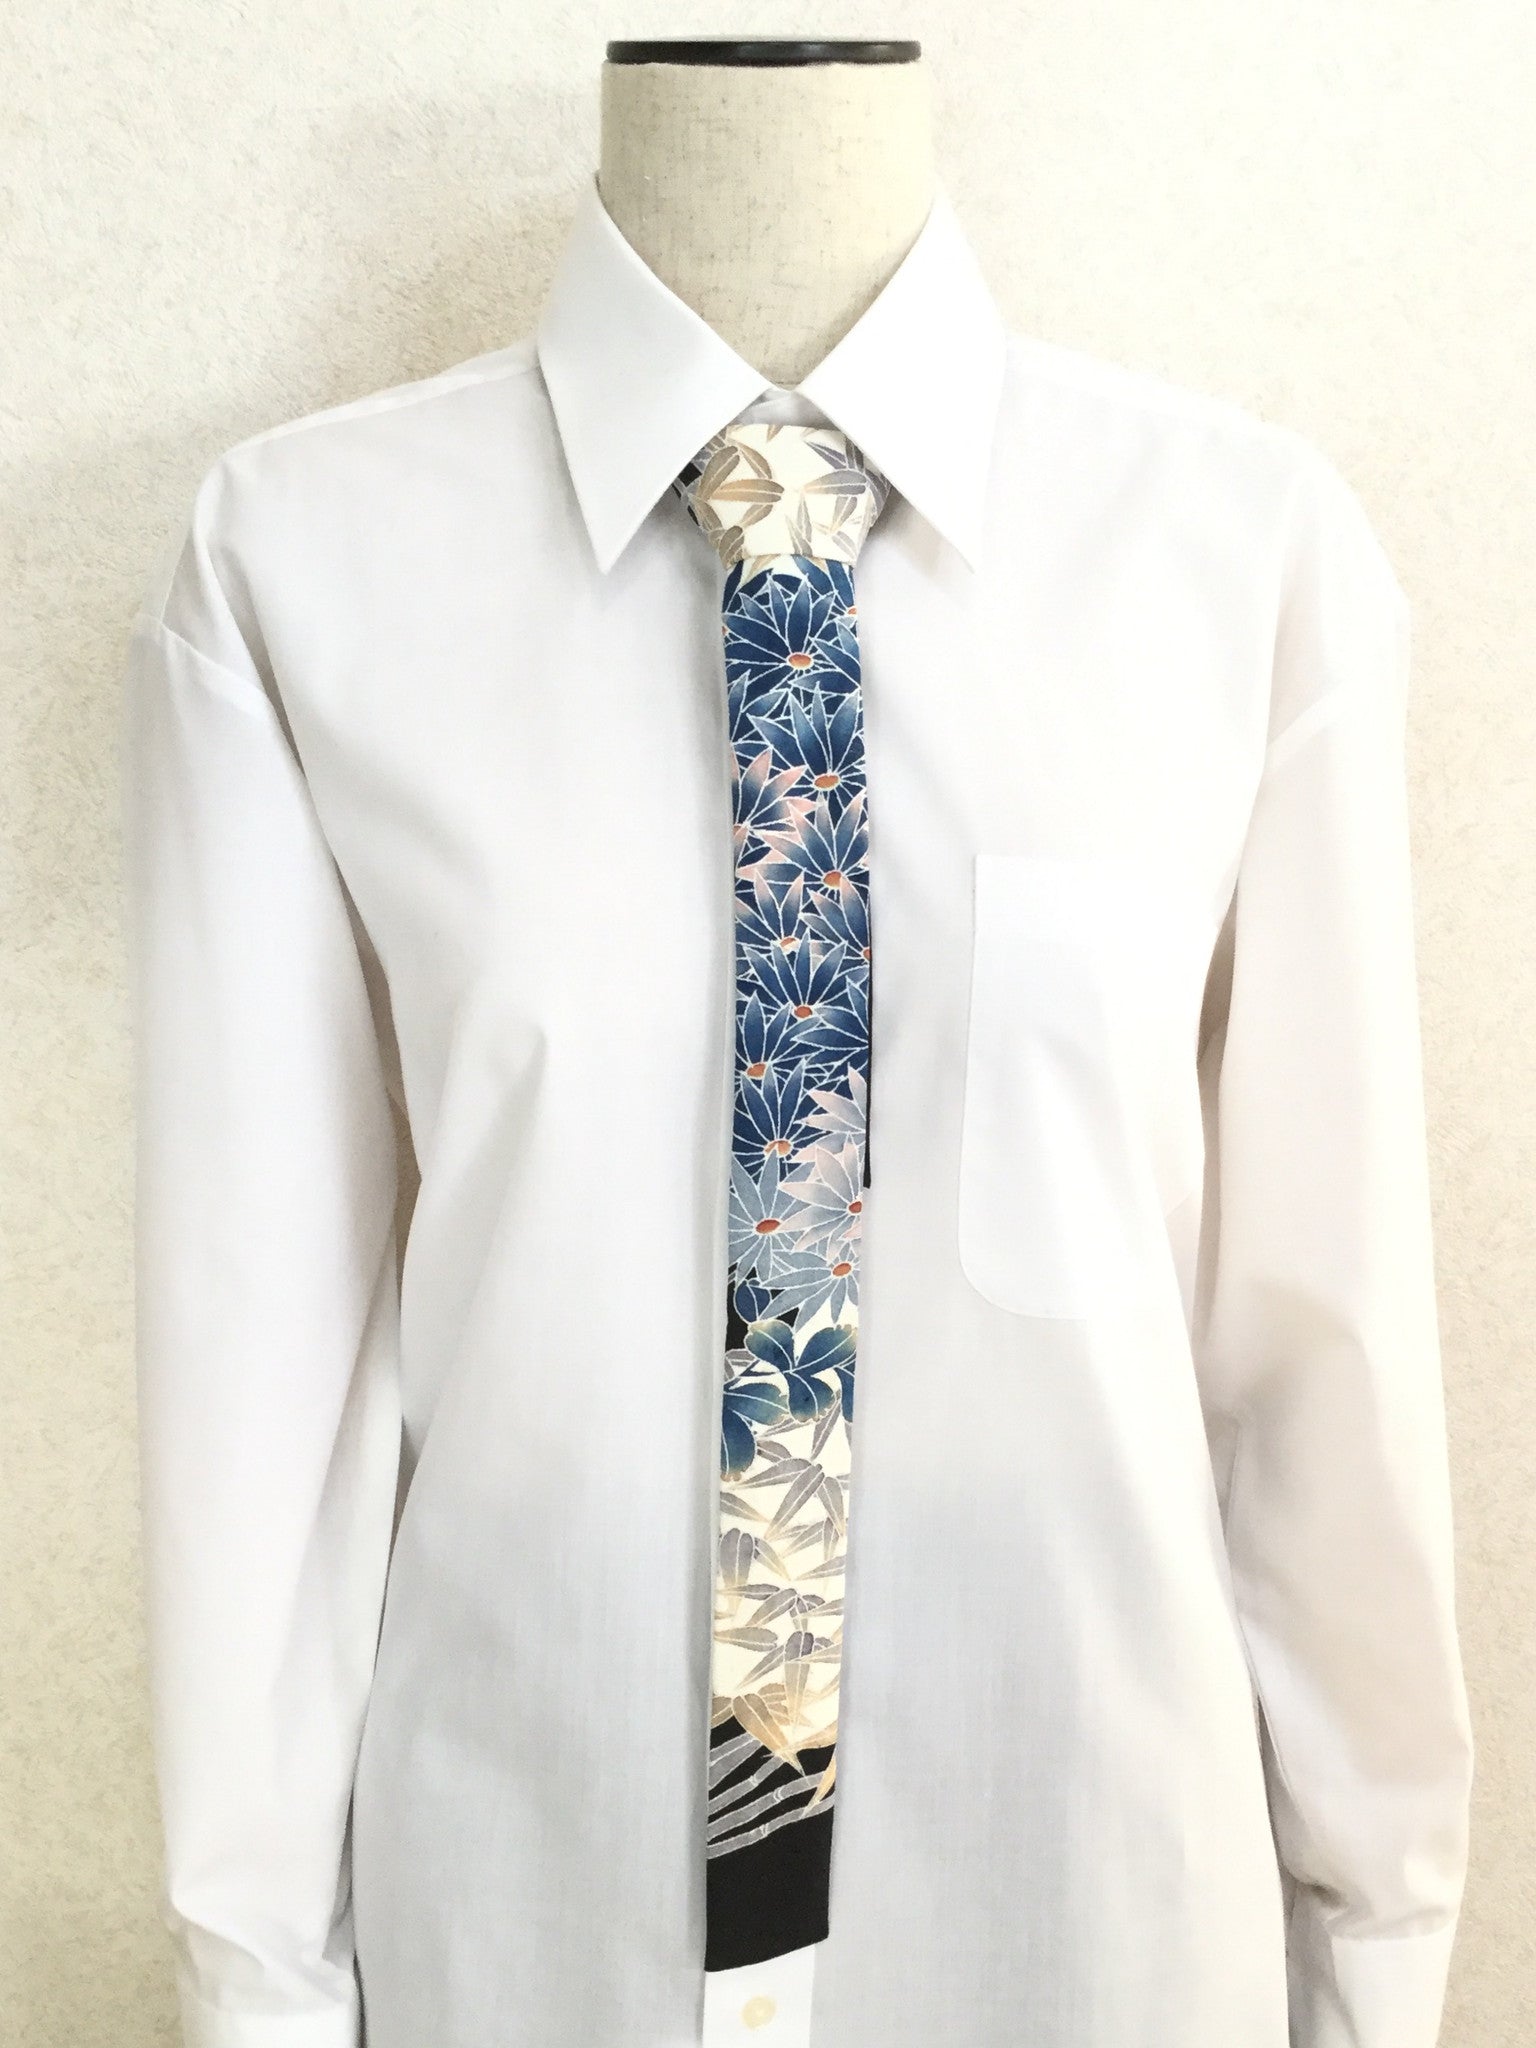 Skinny Necktie Black With Cream And Blue Bamboo And Flowers 着物ネクタイ 黒 Megumi Project